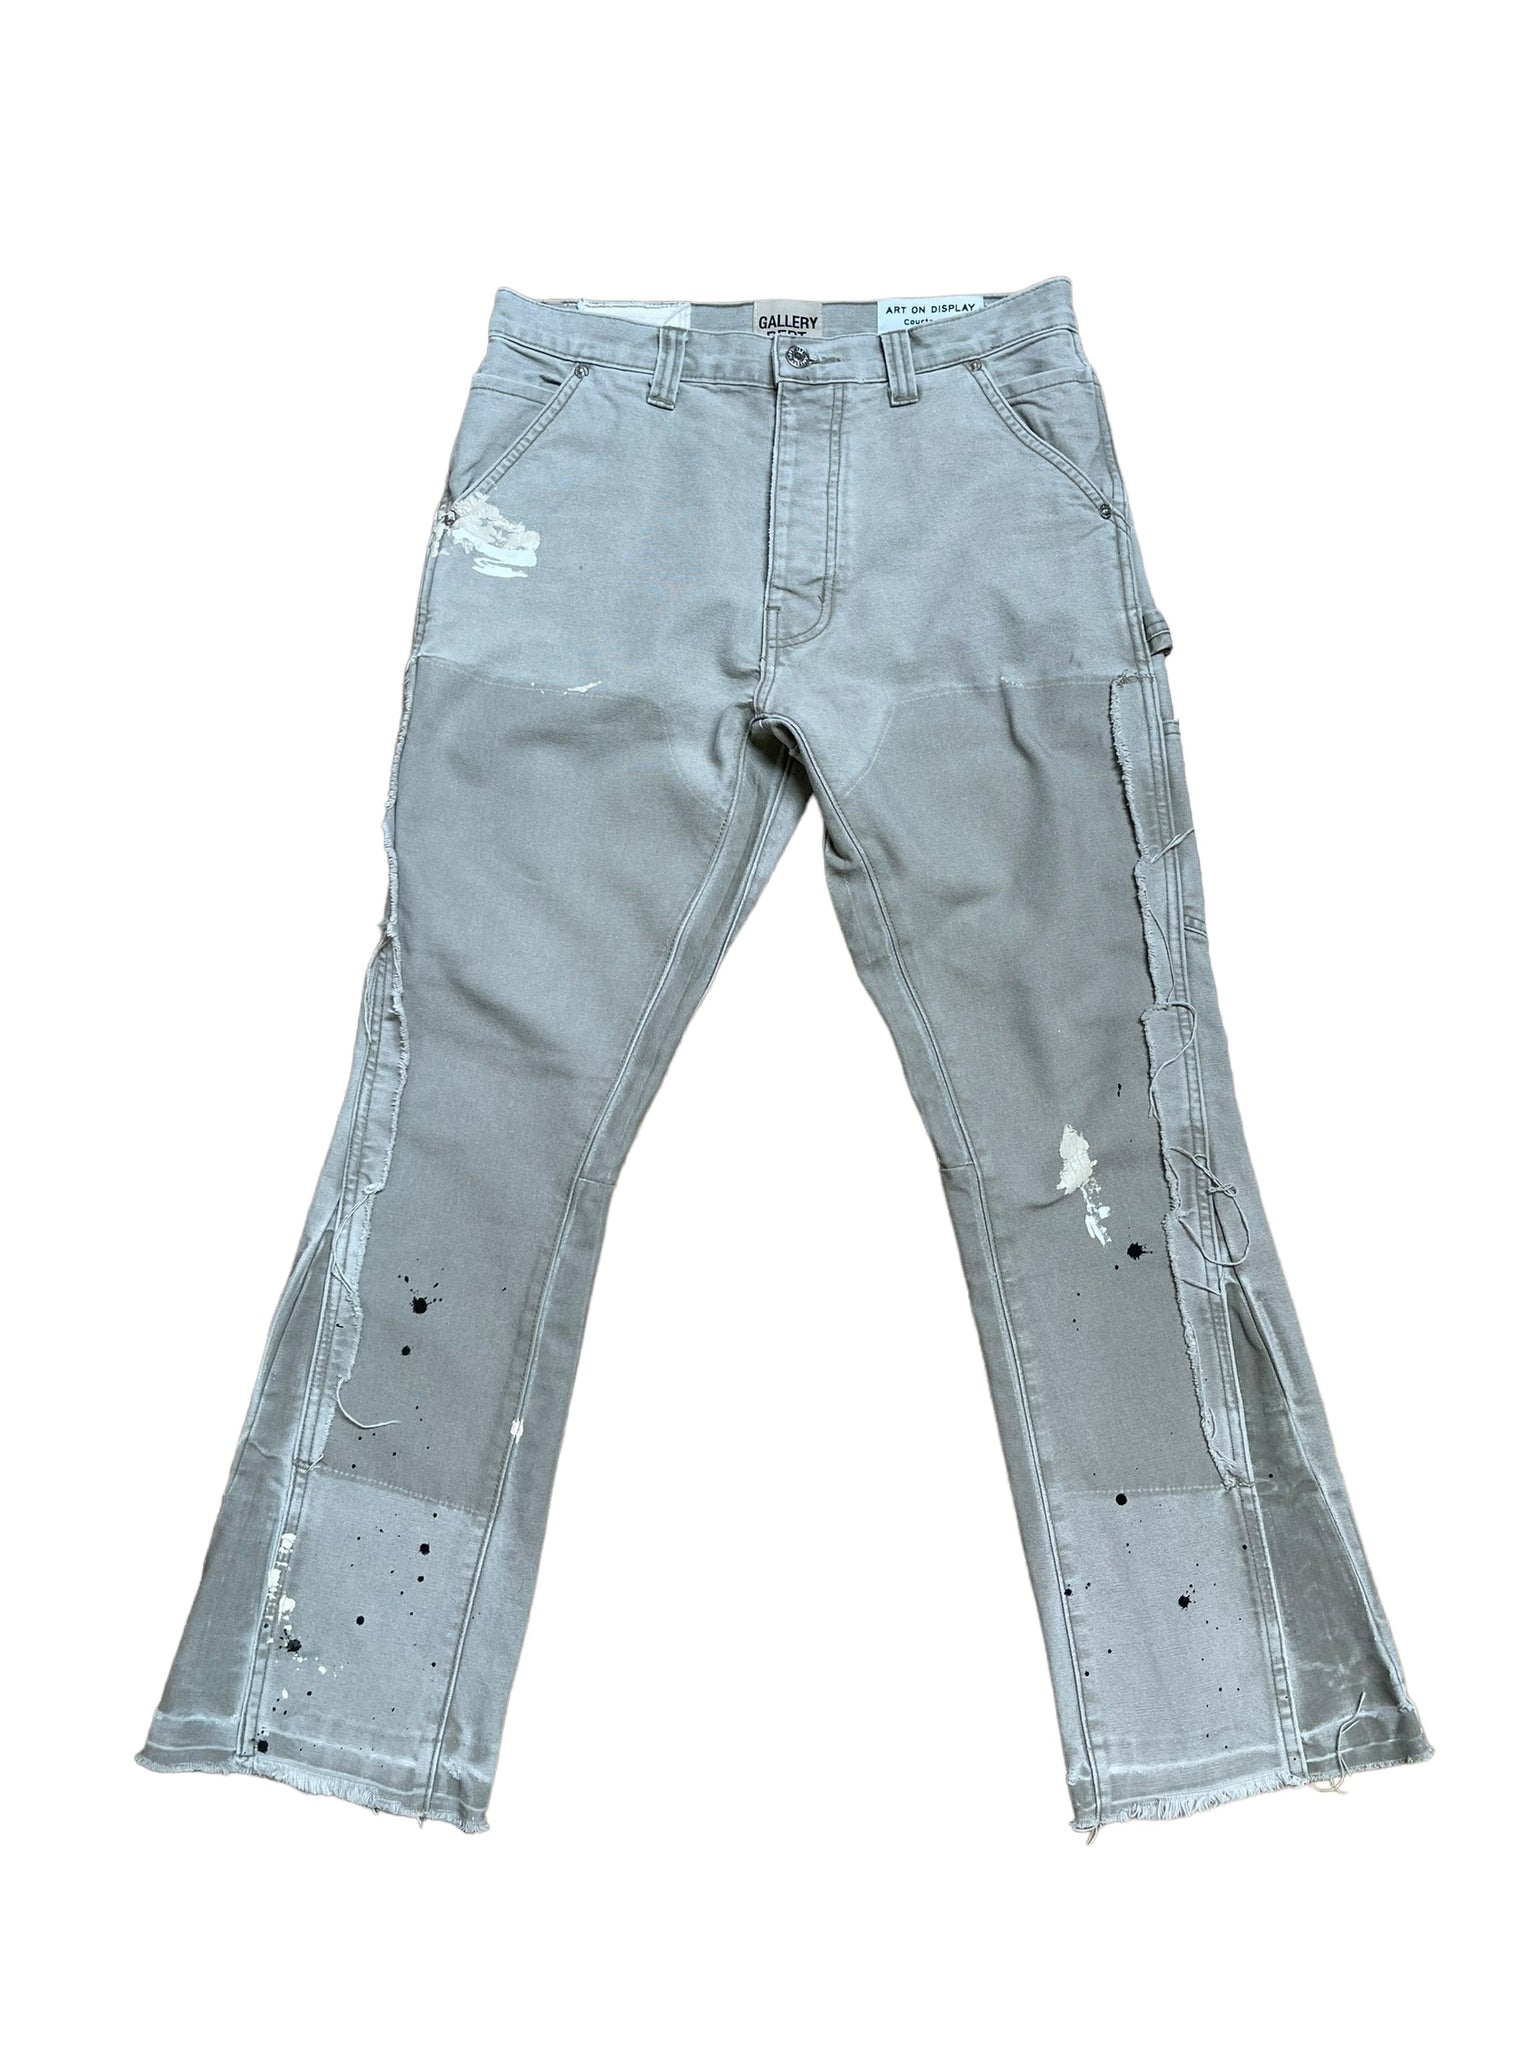 Gallery Dept. Jeans "Cement"